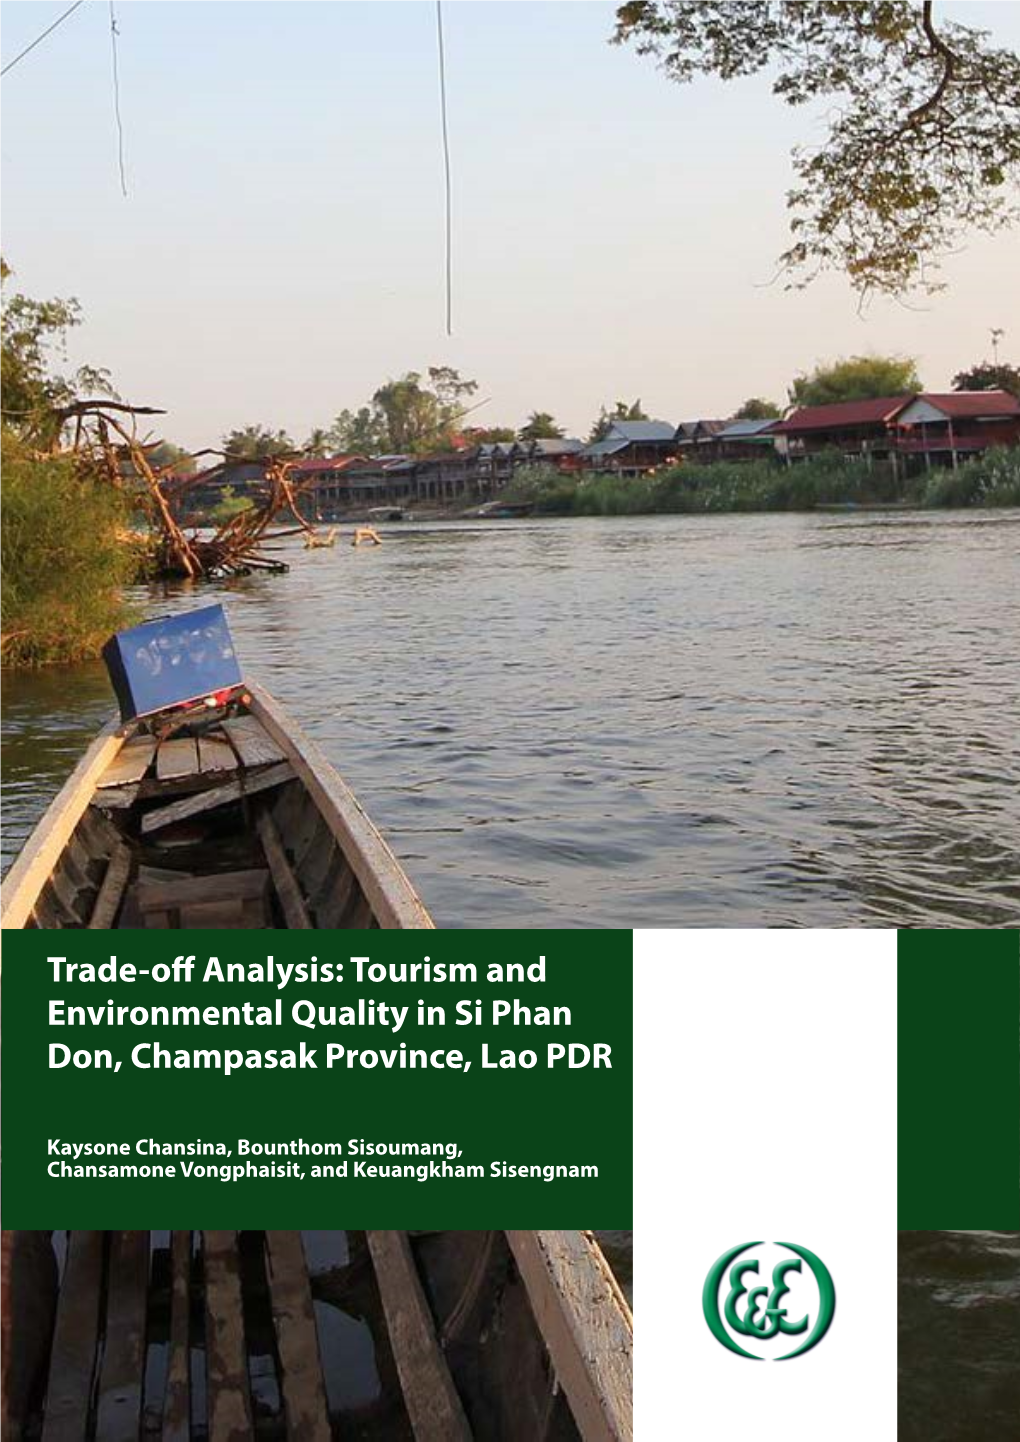 Tourism and Environmental Quality in Si Phan Don, Champasak Province, Lao PDR